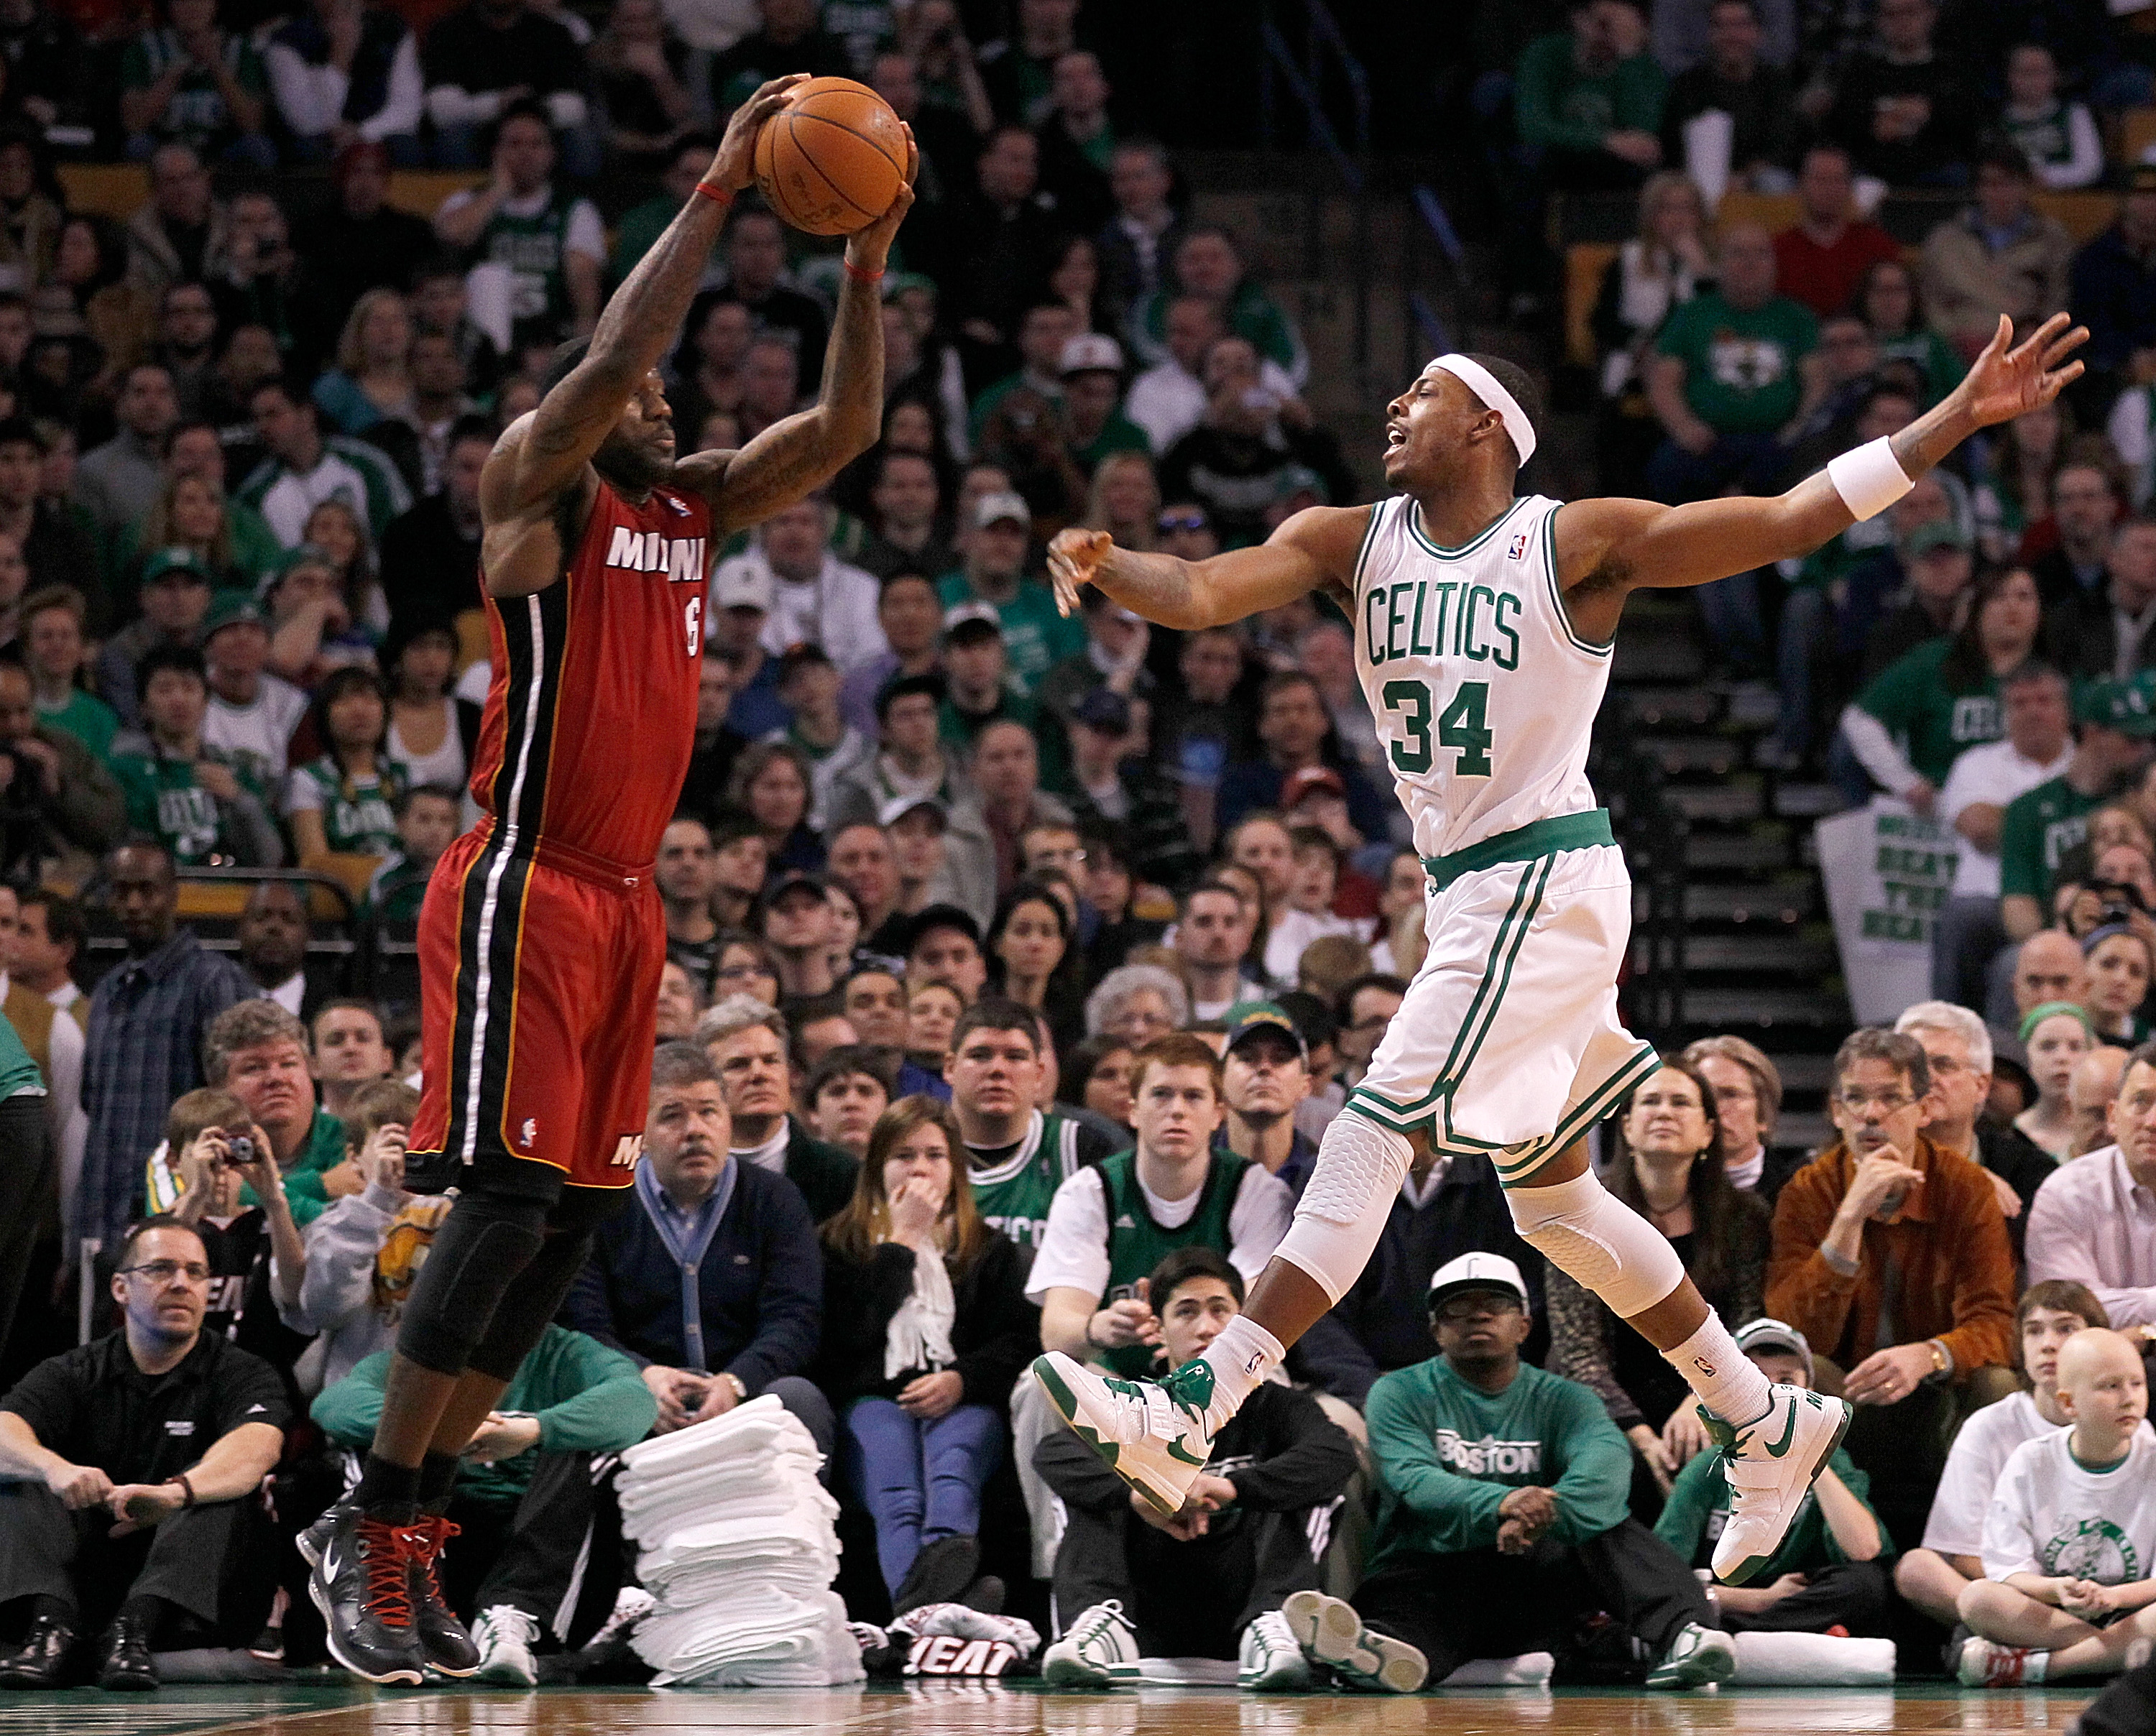 BOSTON - FEBRUARY 13:  LeBron James #6 of the Miami Heat looks to pass against Paul Pierce #34 of the Boston Celtics at TD Garden on February 13, 2011 in Boston, Massachusetts. NOTE TO USER: User expressly acknowledges and agrees that, by downloading and/